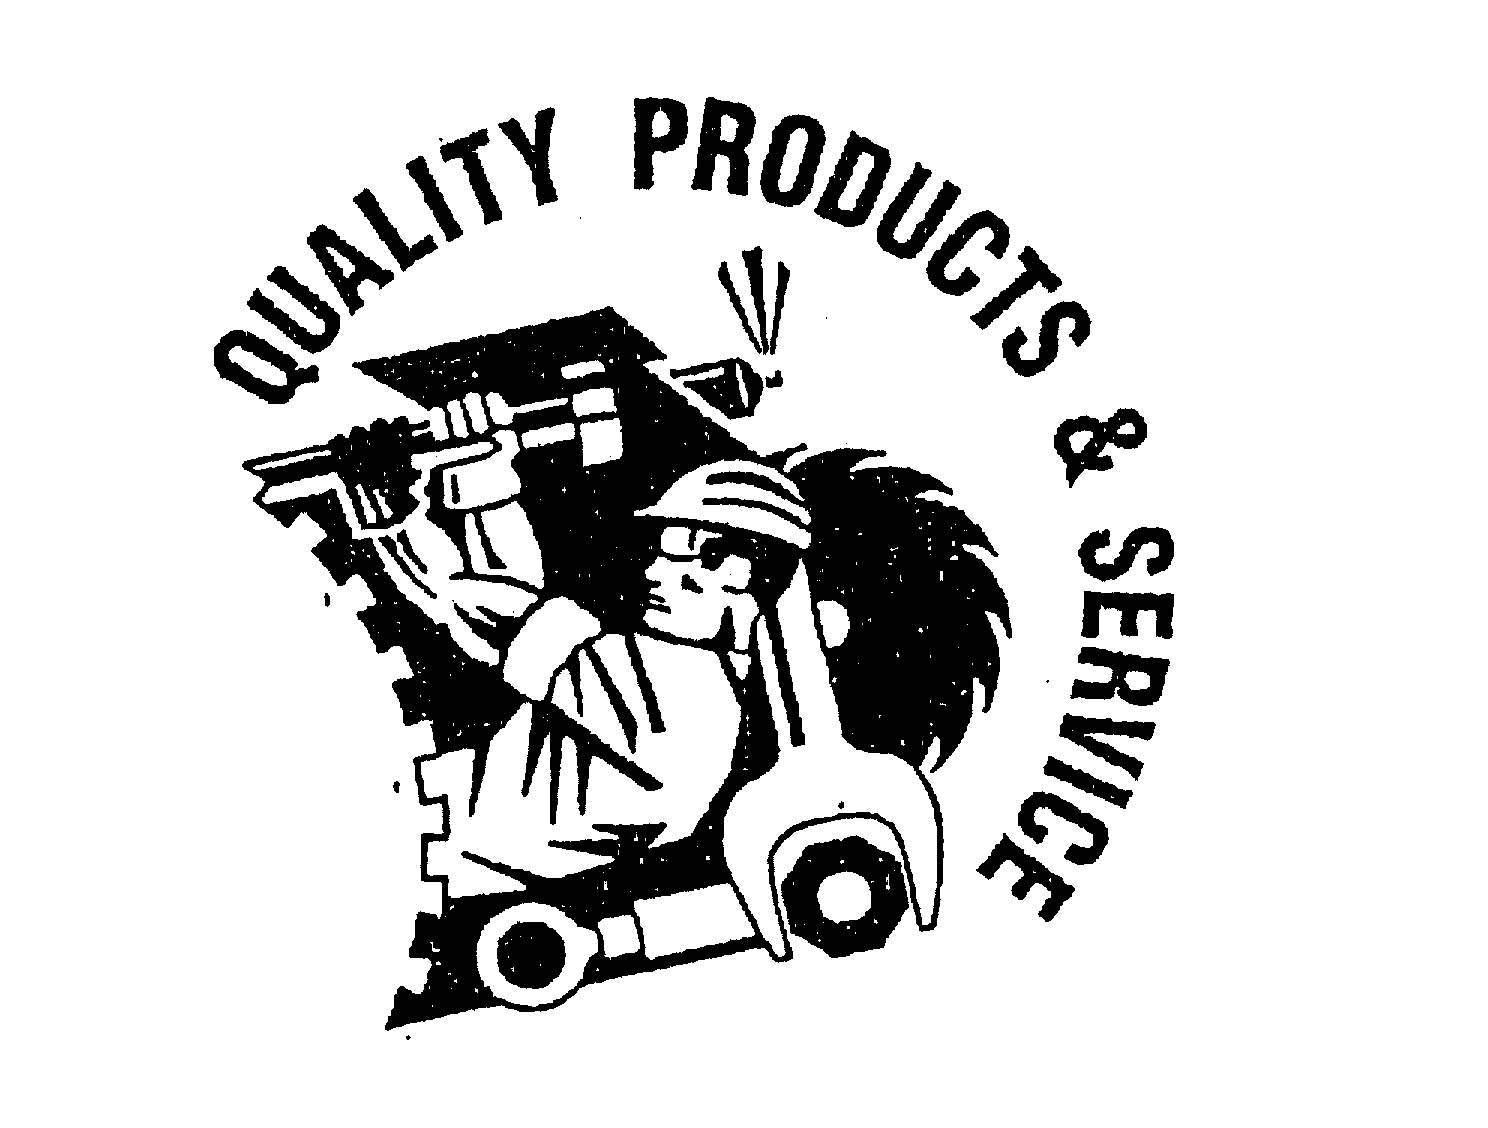  QUALITY PRODUCTS AND SERVICE